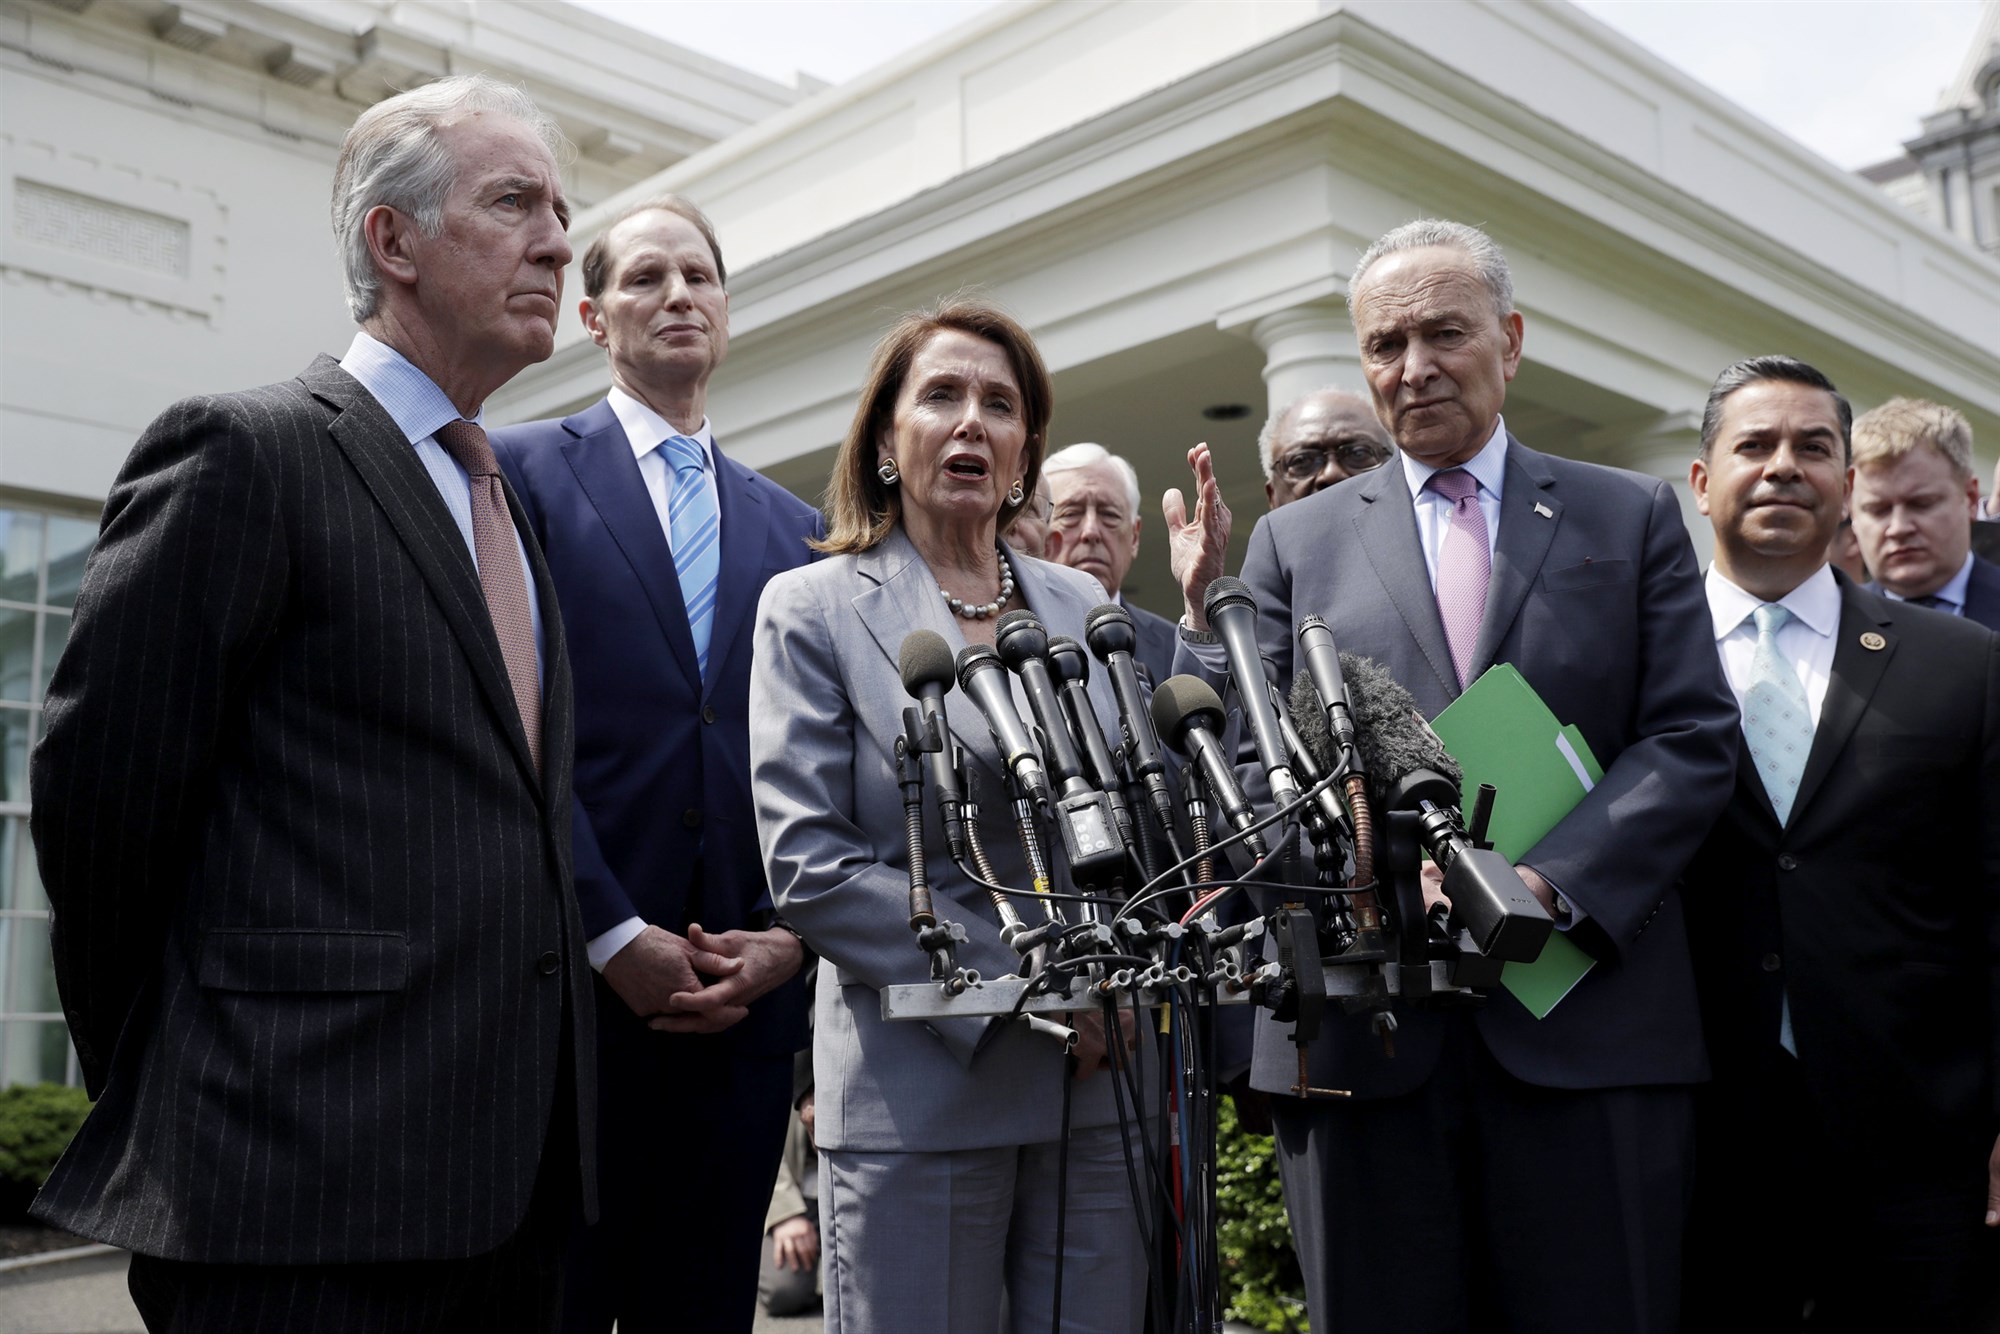 nancy-pelosi-says-donald-trump-ready-to-spend-2-trillion-on-infrastructure-including-broadband